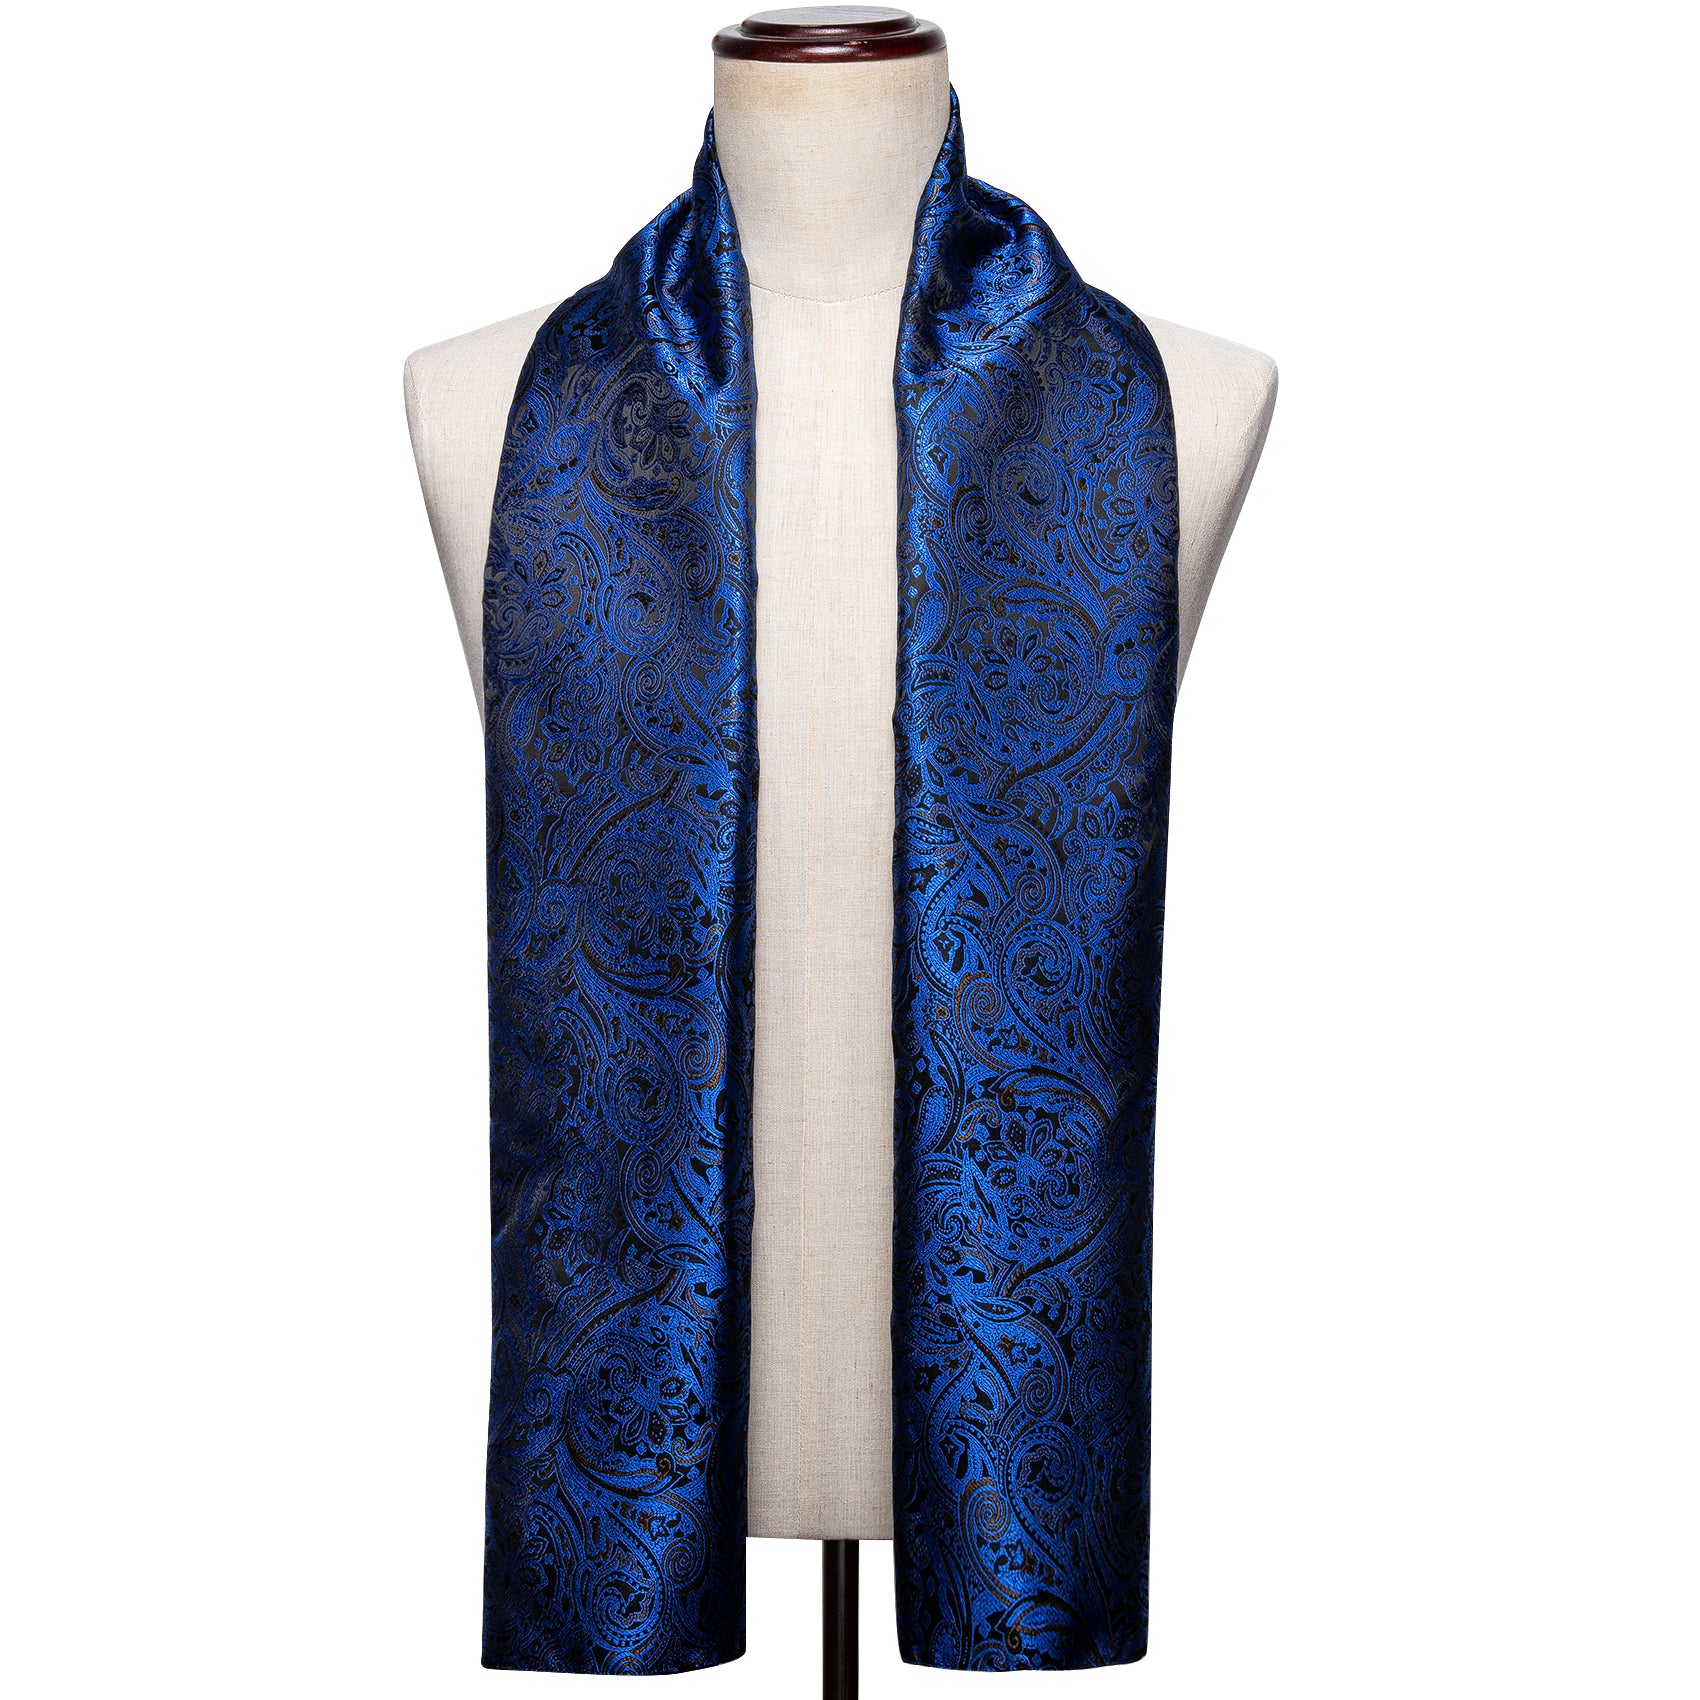 Barry.wang Men's Scarf Luxury Blue Black Floral Scarf New Arrival